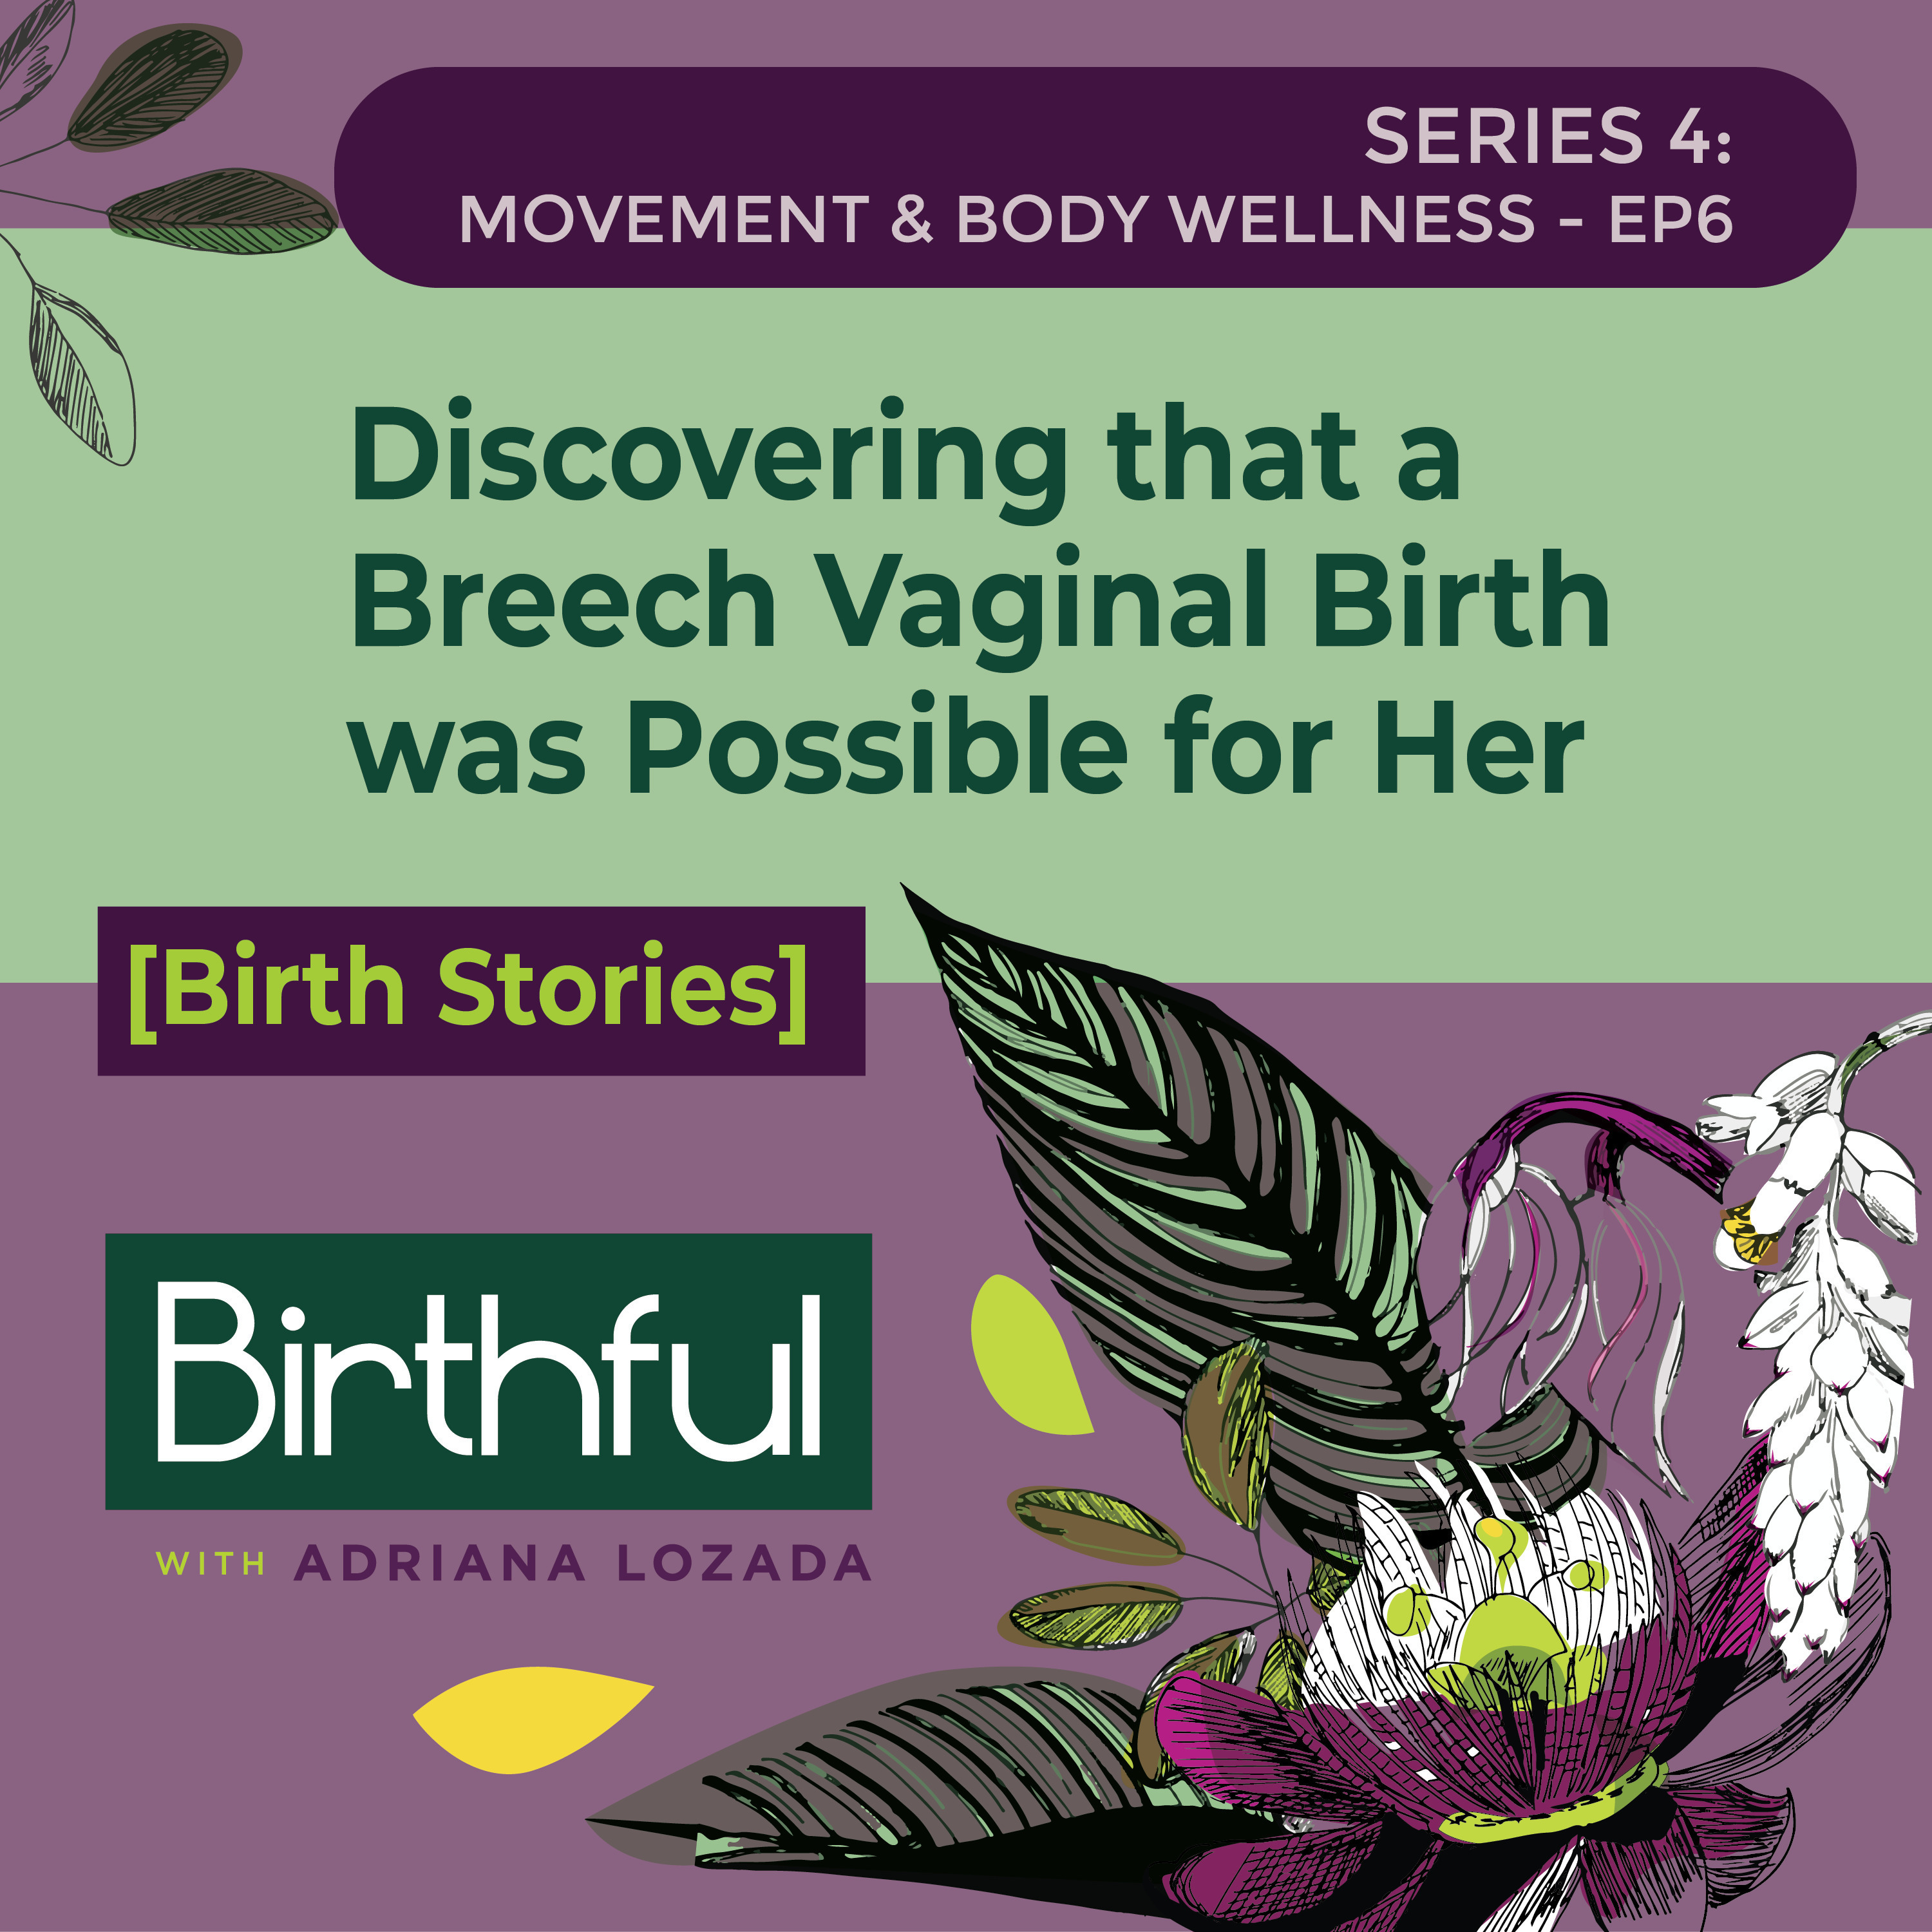 [Birth Stories] Discovering that a Breech Vaginal Birth was Possible for Her